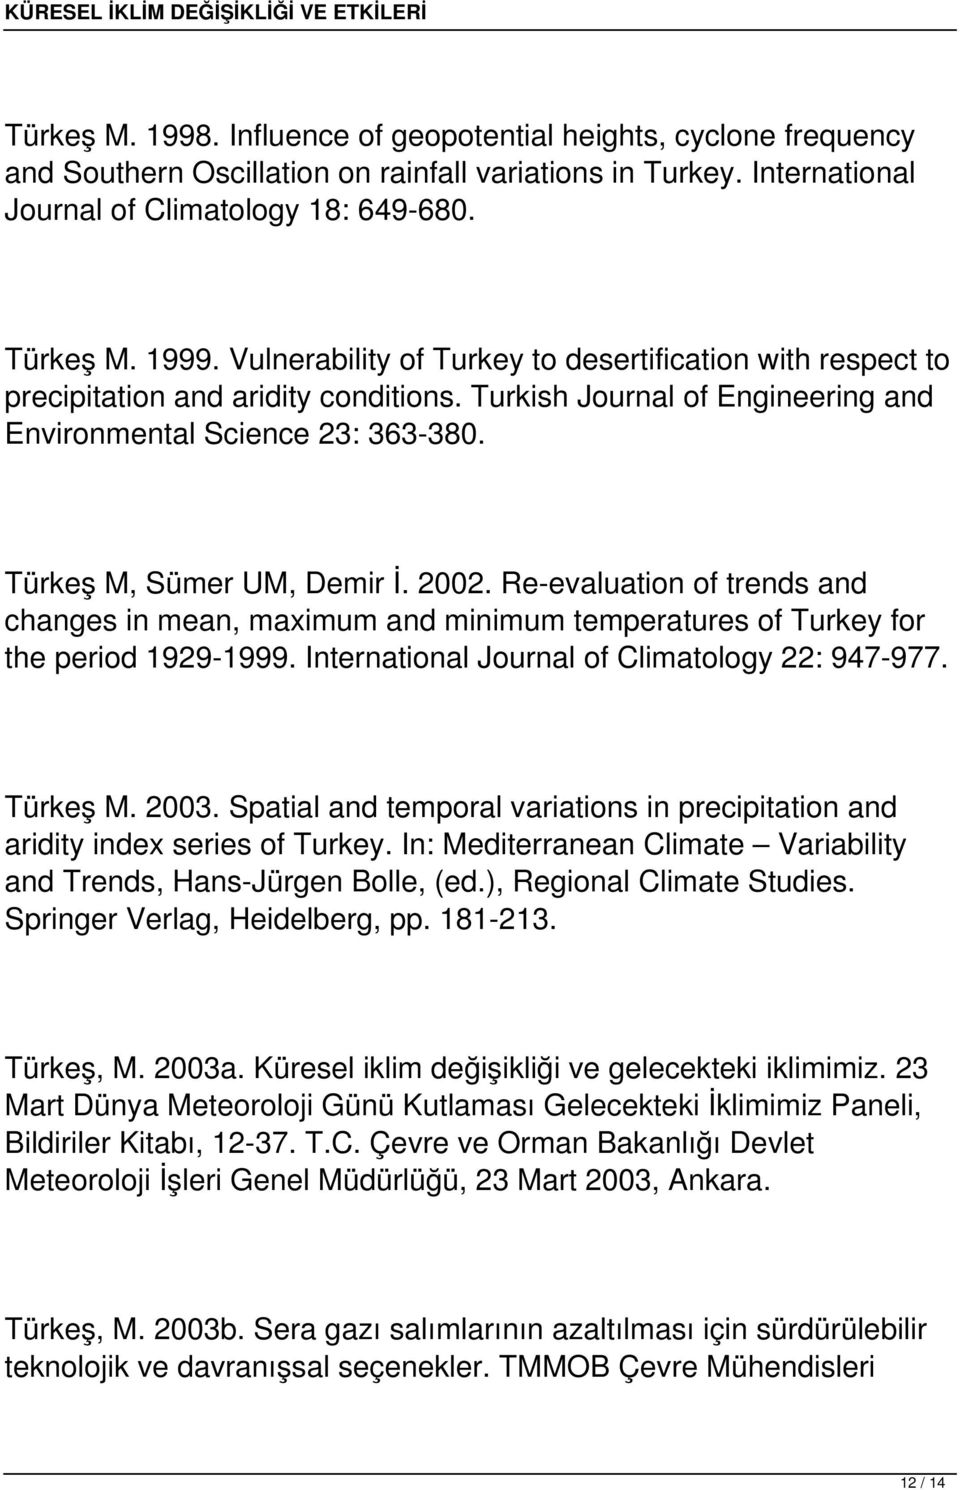 2002. Re-evaluation of trends and changes in mean, maximum and minimum temperatures of Turkey for the period 1929-1999. International Journal of Climatology 22: 947-977. Türkeş M. 2003.